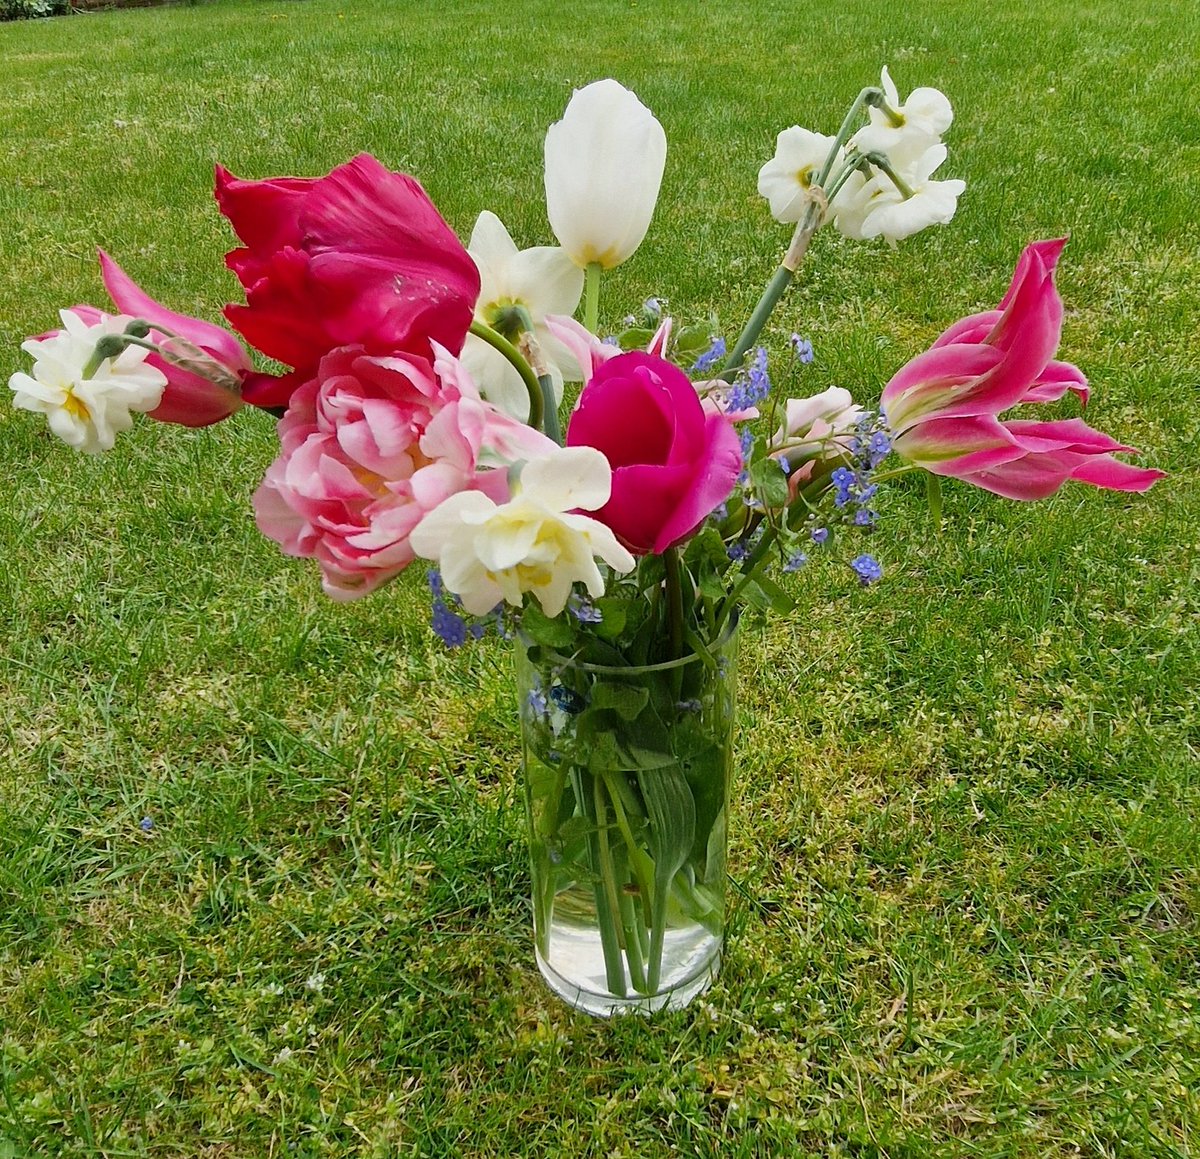 A bouquet of tulips and daffodils picked straight from my garden. #tulip #garden #daffodil